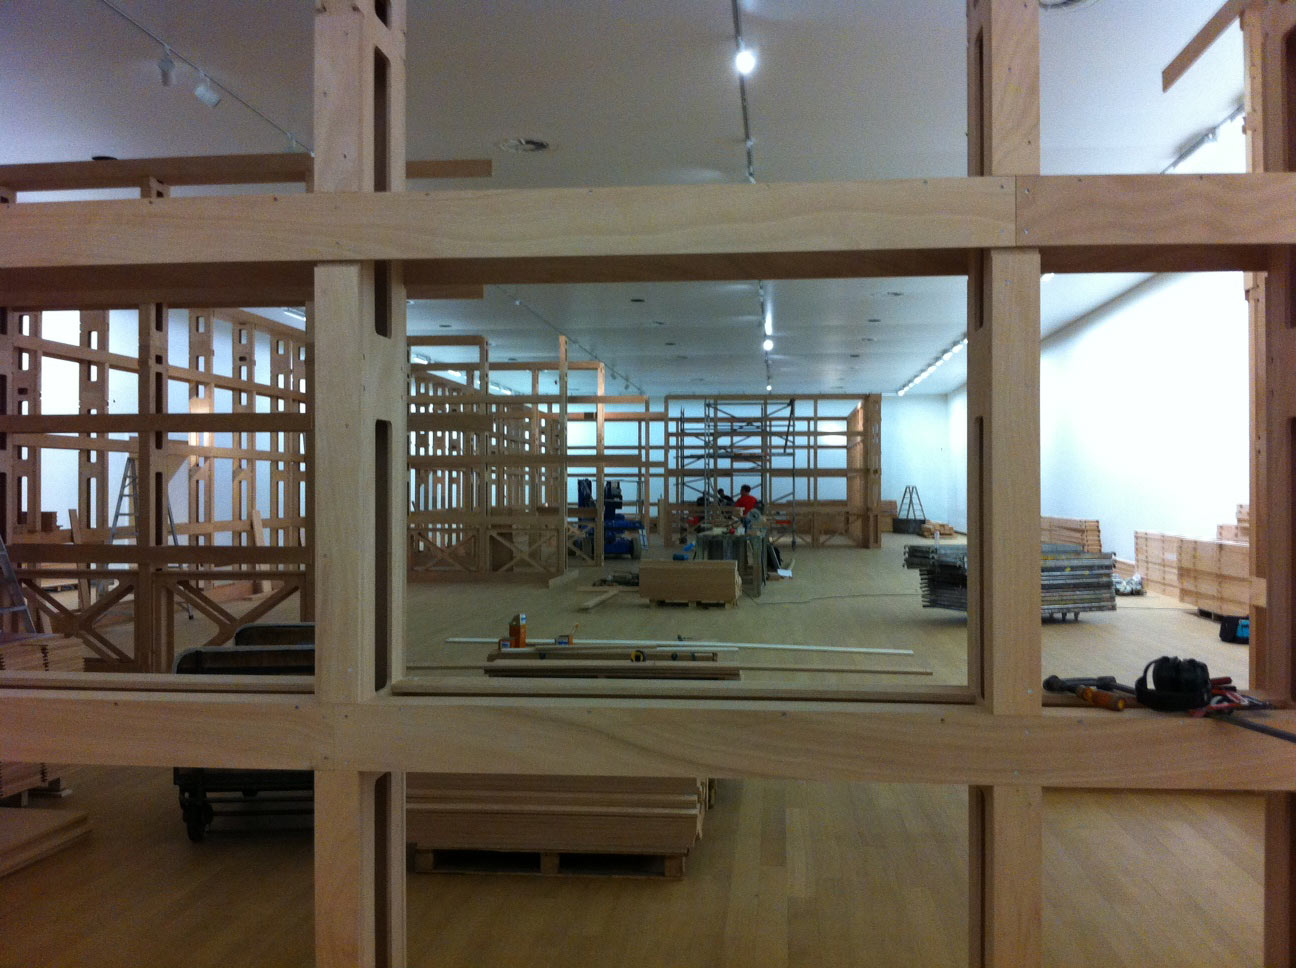 Works in Place - Stedelijk Museum Amsterdam